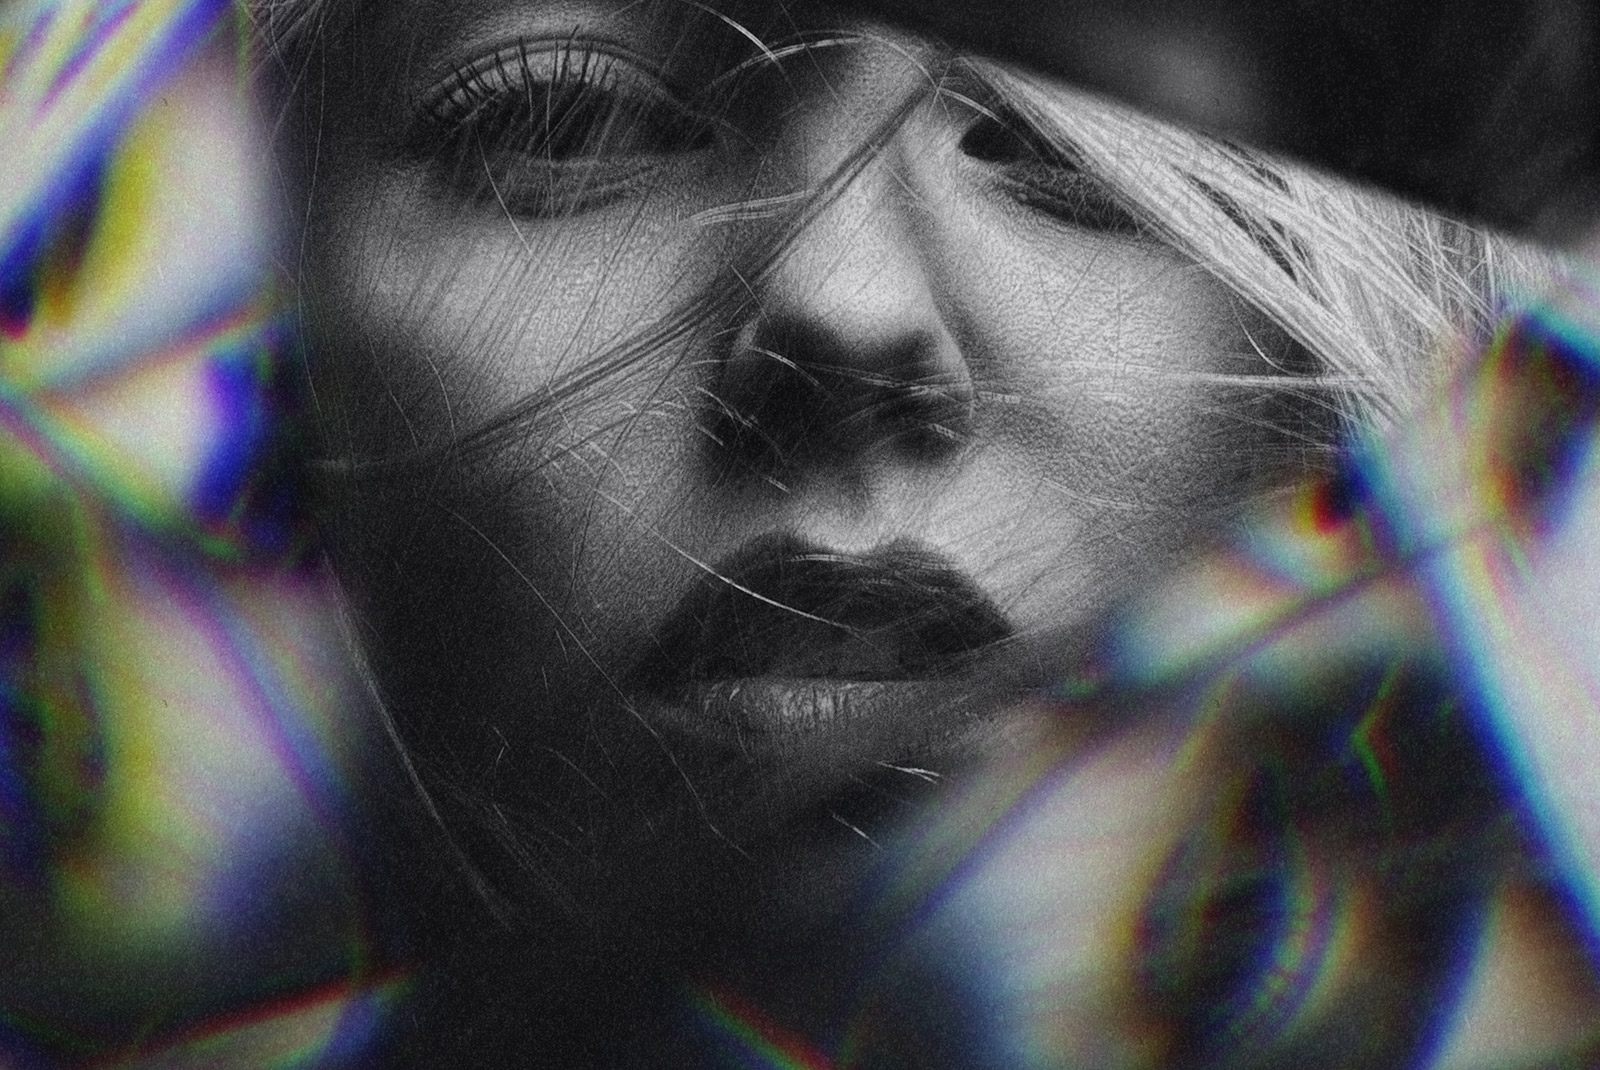 Close-up of a part of a woman's face with prism light effects, in grayscale, suitable for striking graphics or textured overlay designs.